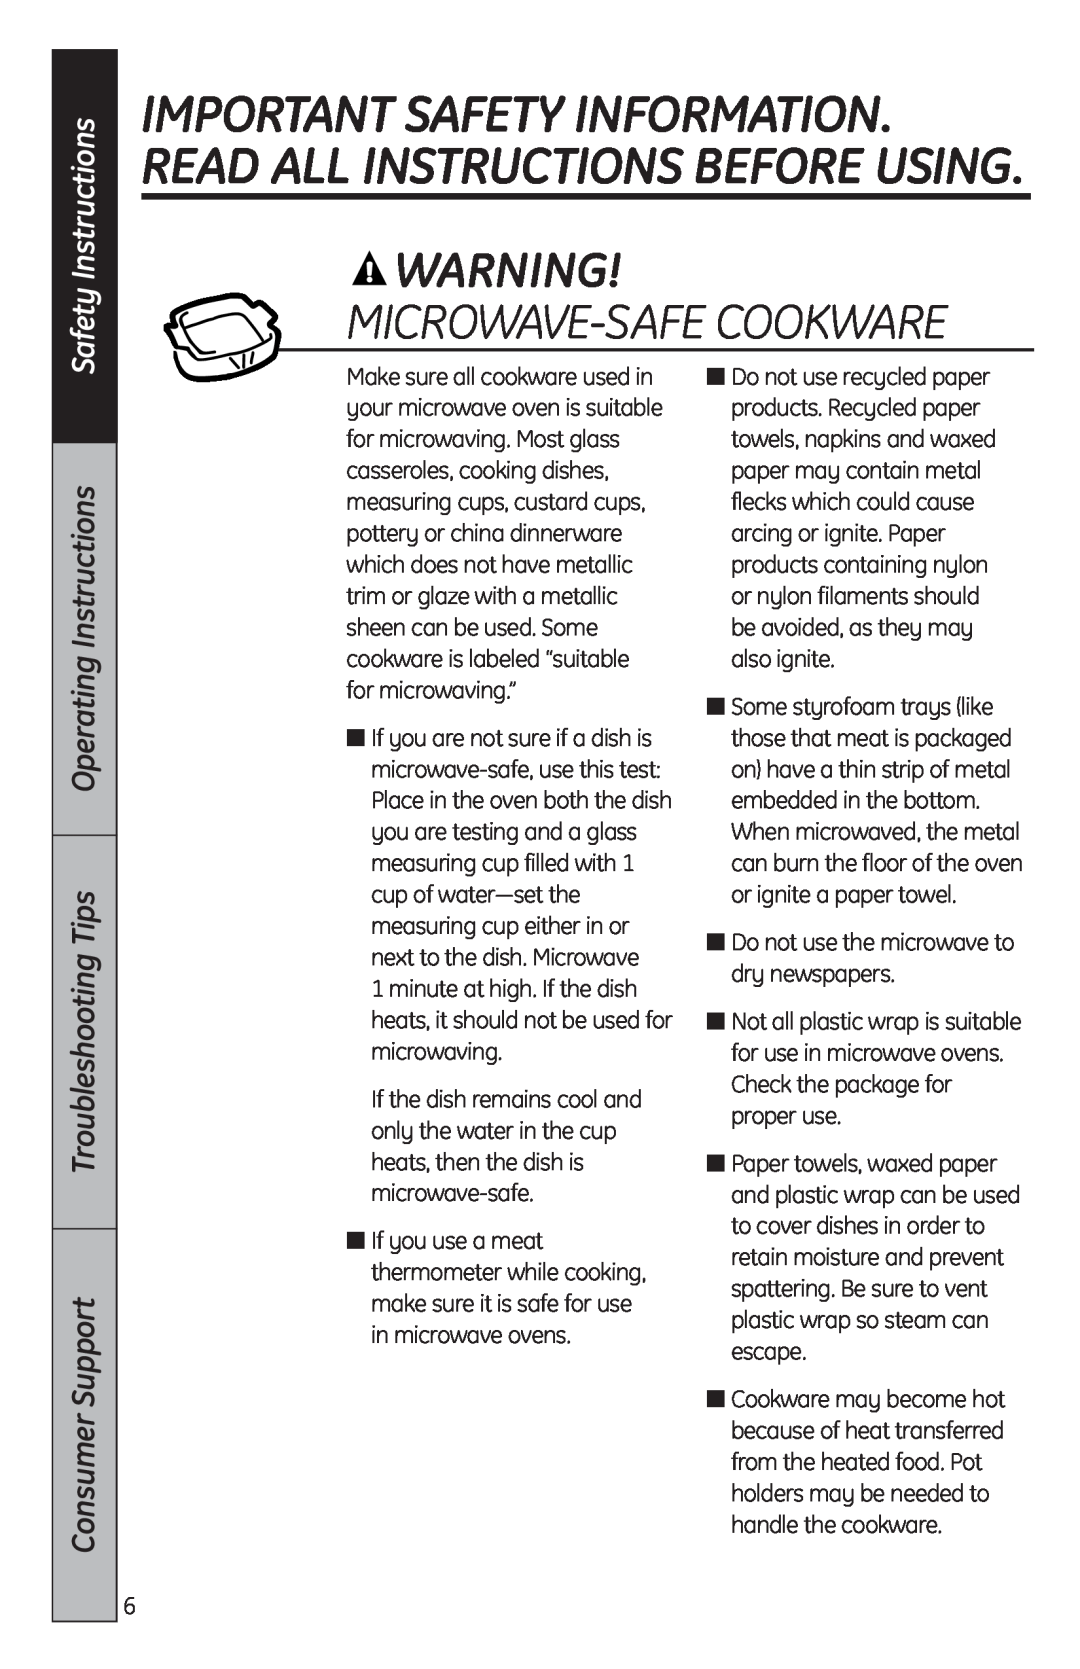 GE MFL38268203 Microwave-Safecookware, Troubleshooting Tips Operating Instructions, Safety Instructions, Consumer Support 